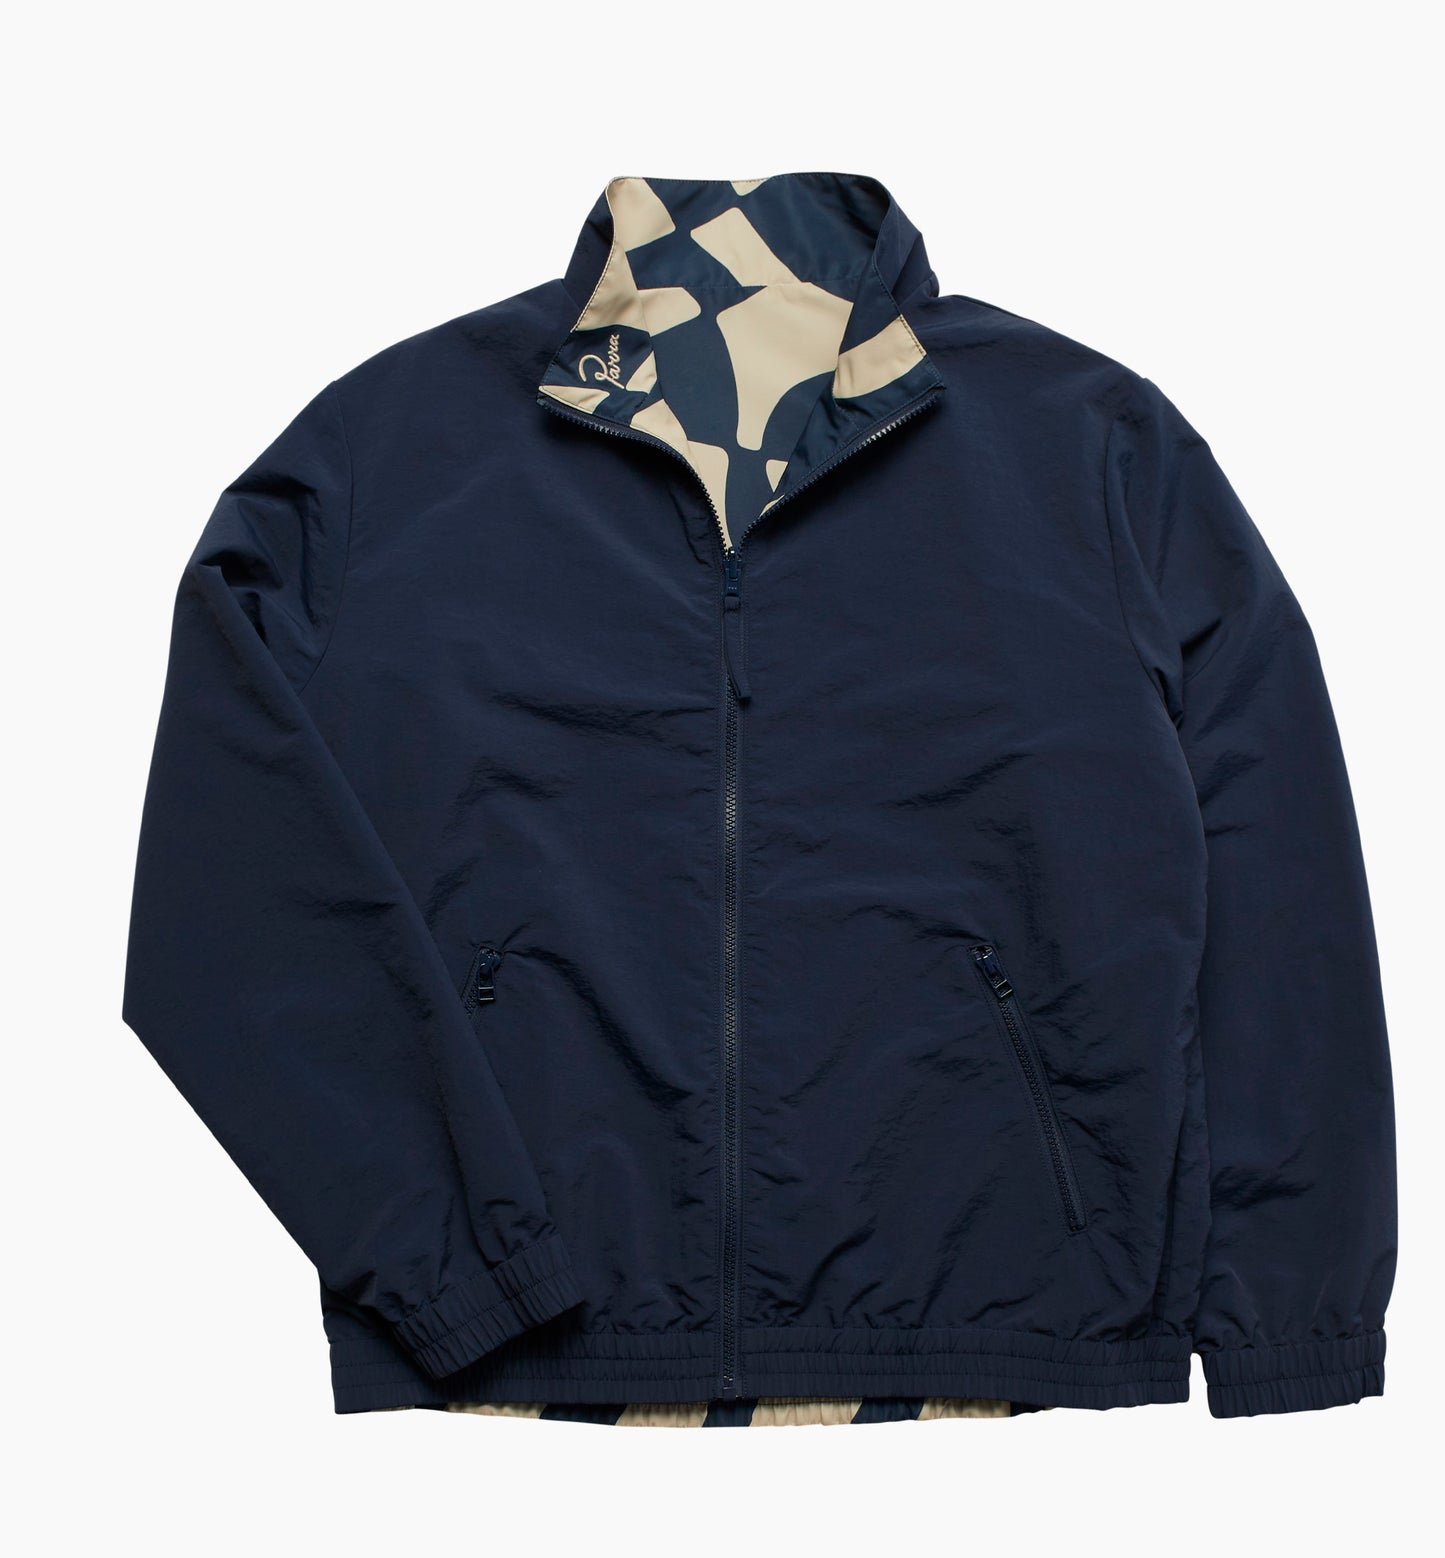 By Parra Zoom Winds Reversible Track Jacket